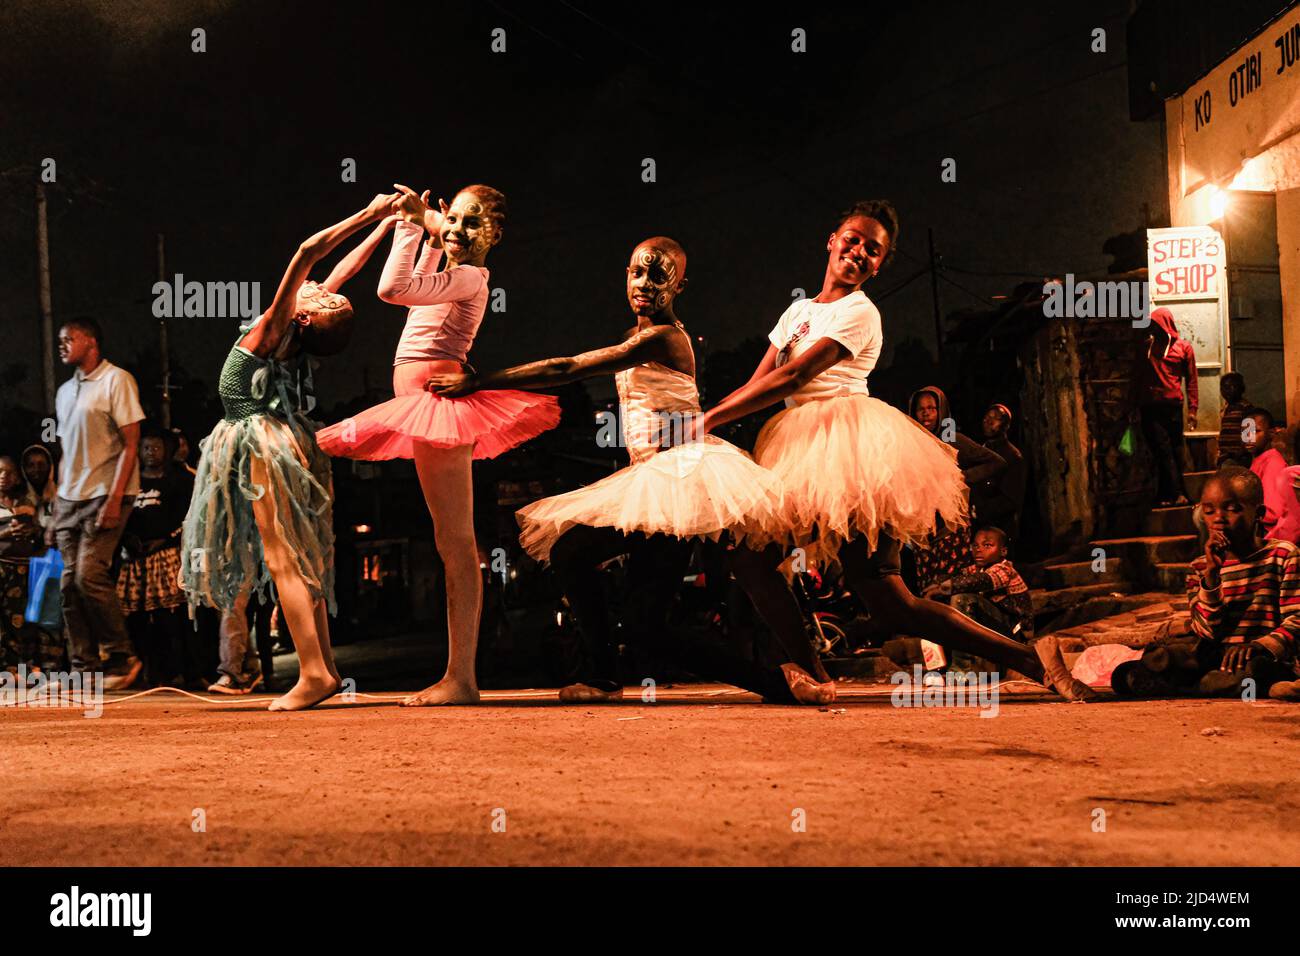 June 11, 2022, Nairobi, Kenya: Young ballerinas from Kibera Slums show off  their skills during a ballet dance night dressed in colorful costumes in  Nairobi. A team of young ballerinas from the